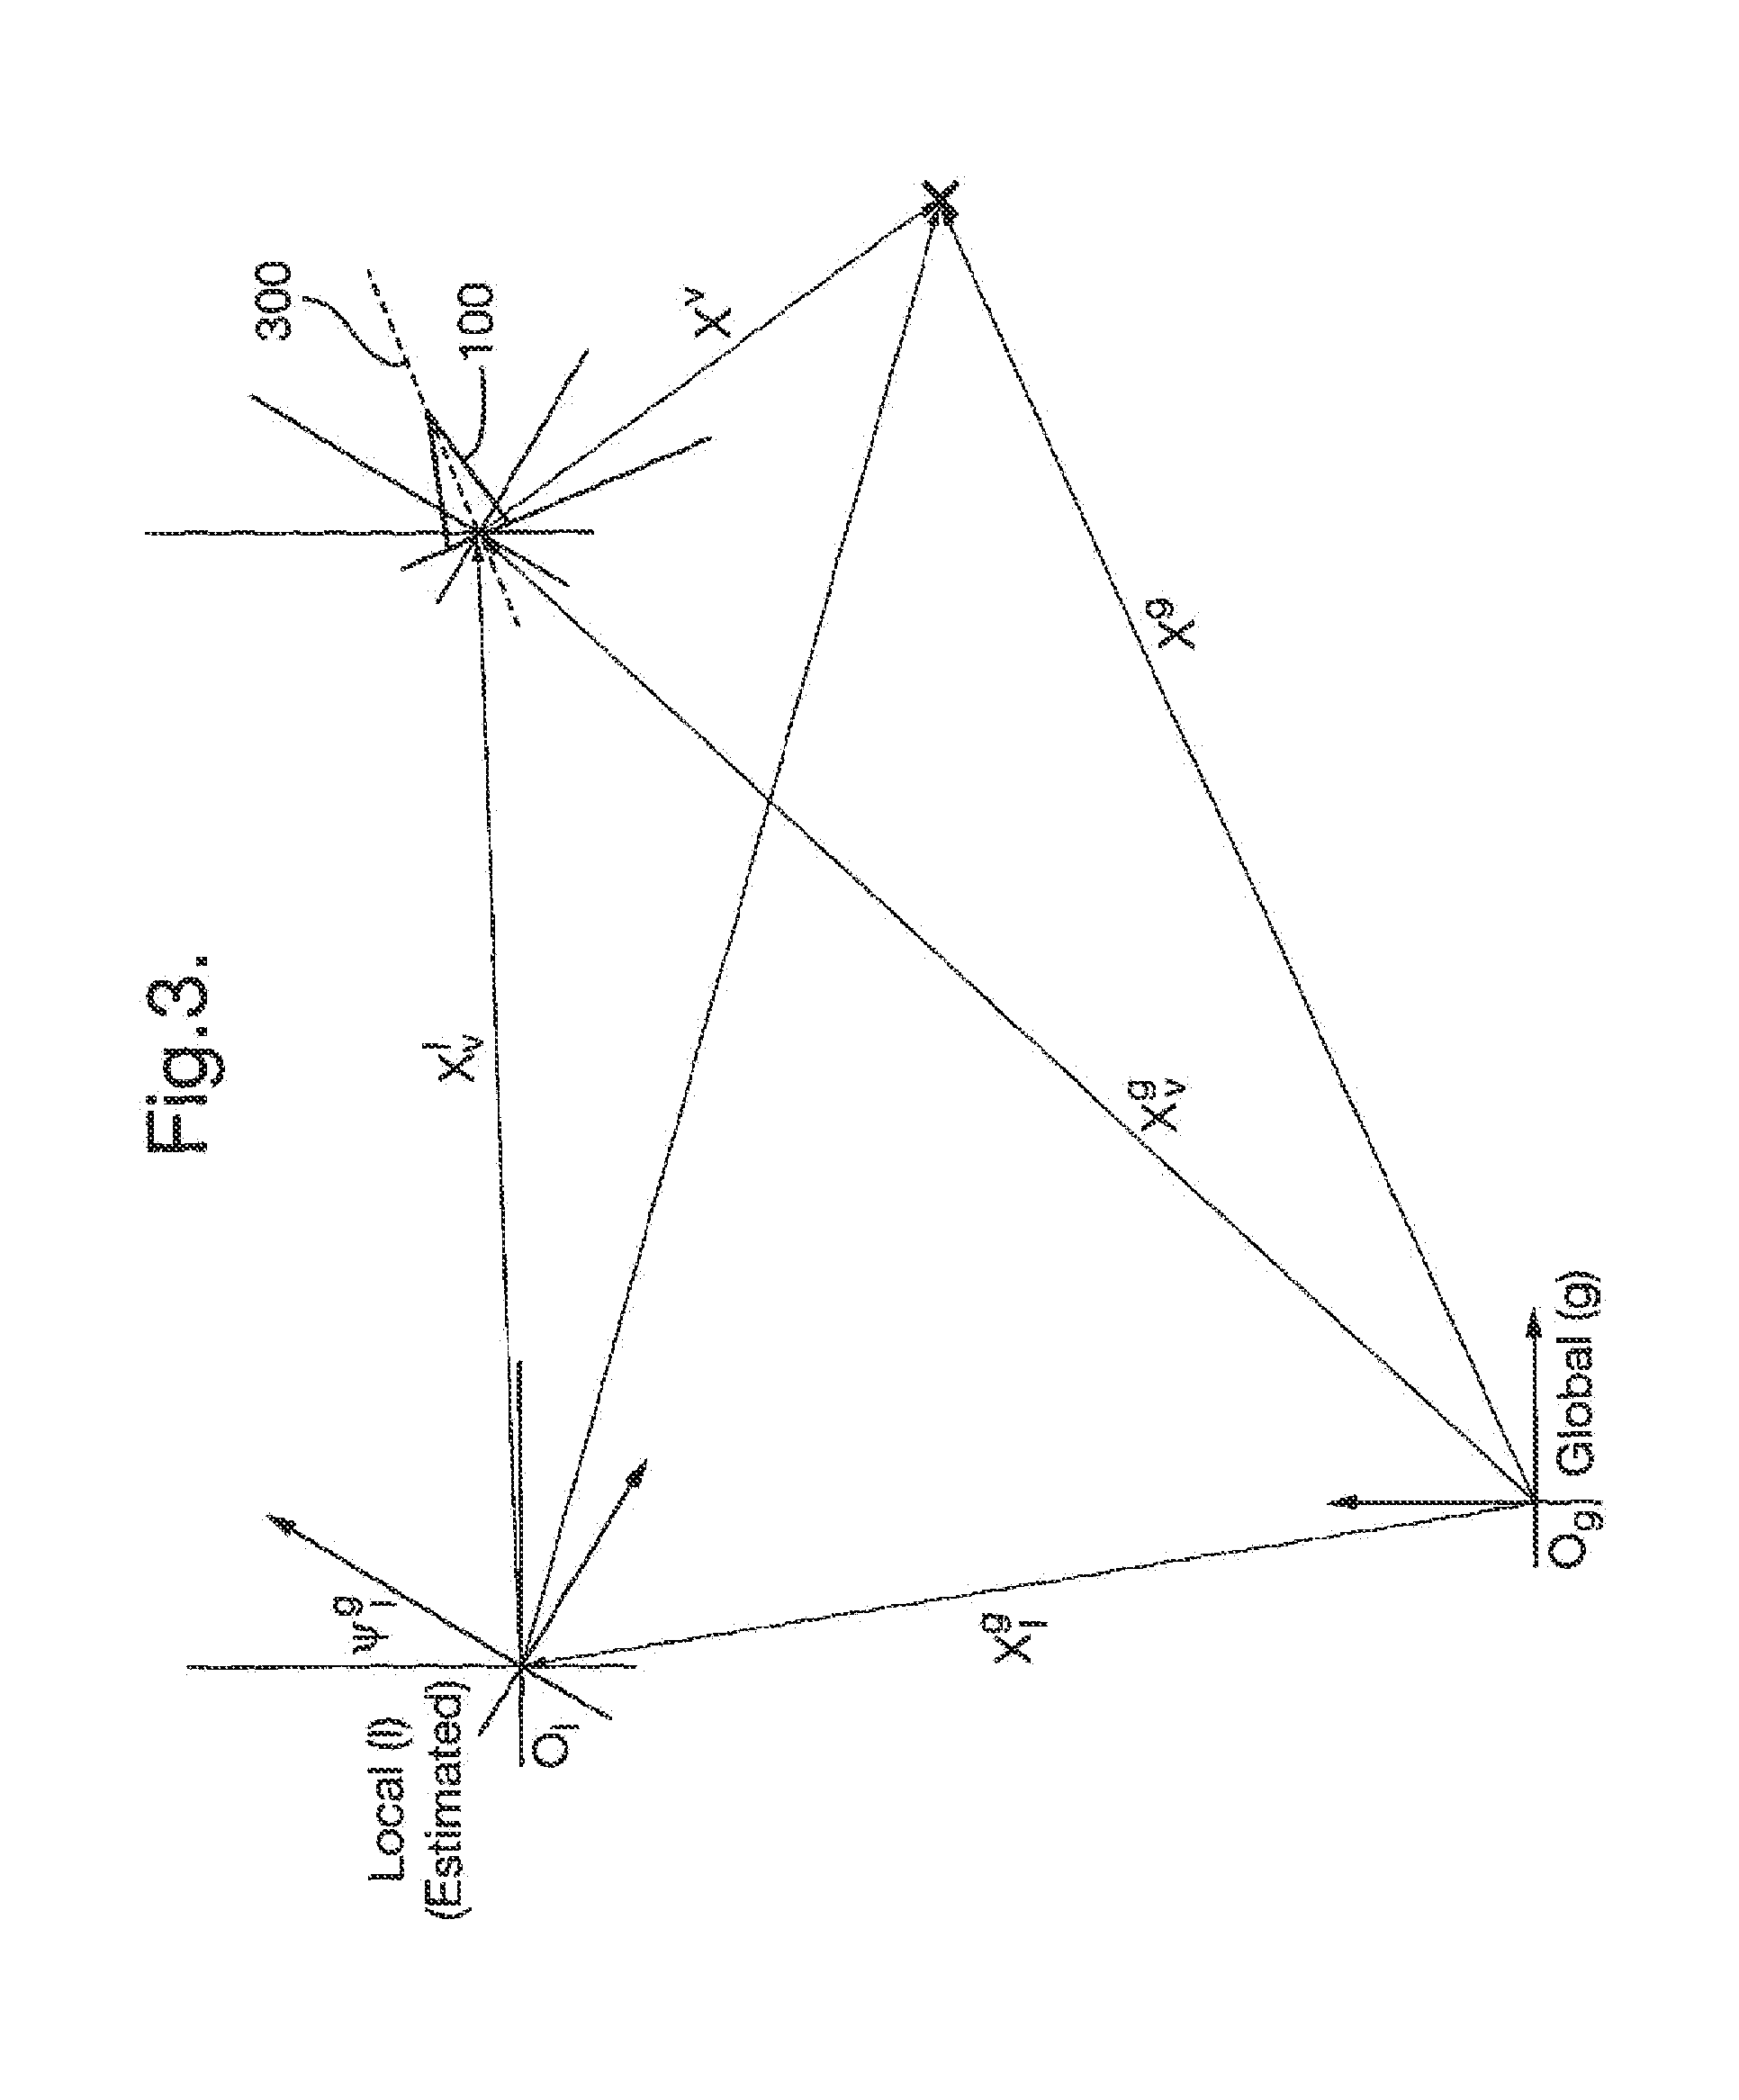 Estimating positions of a device and at least one target in an environment